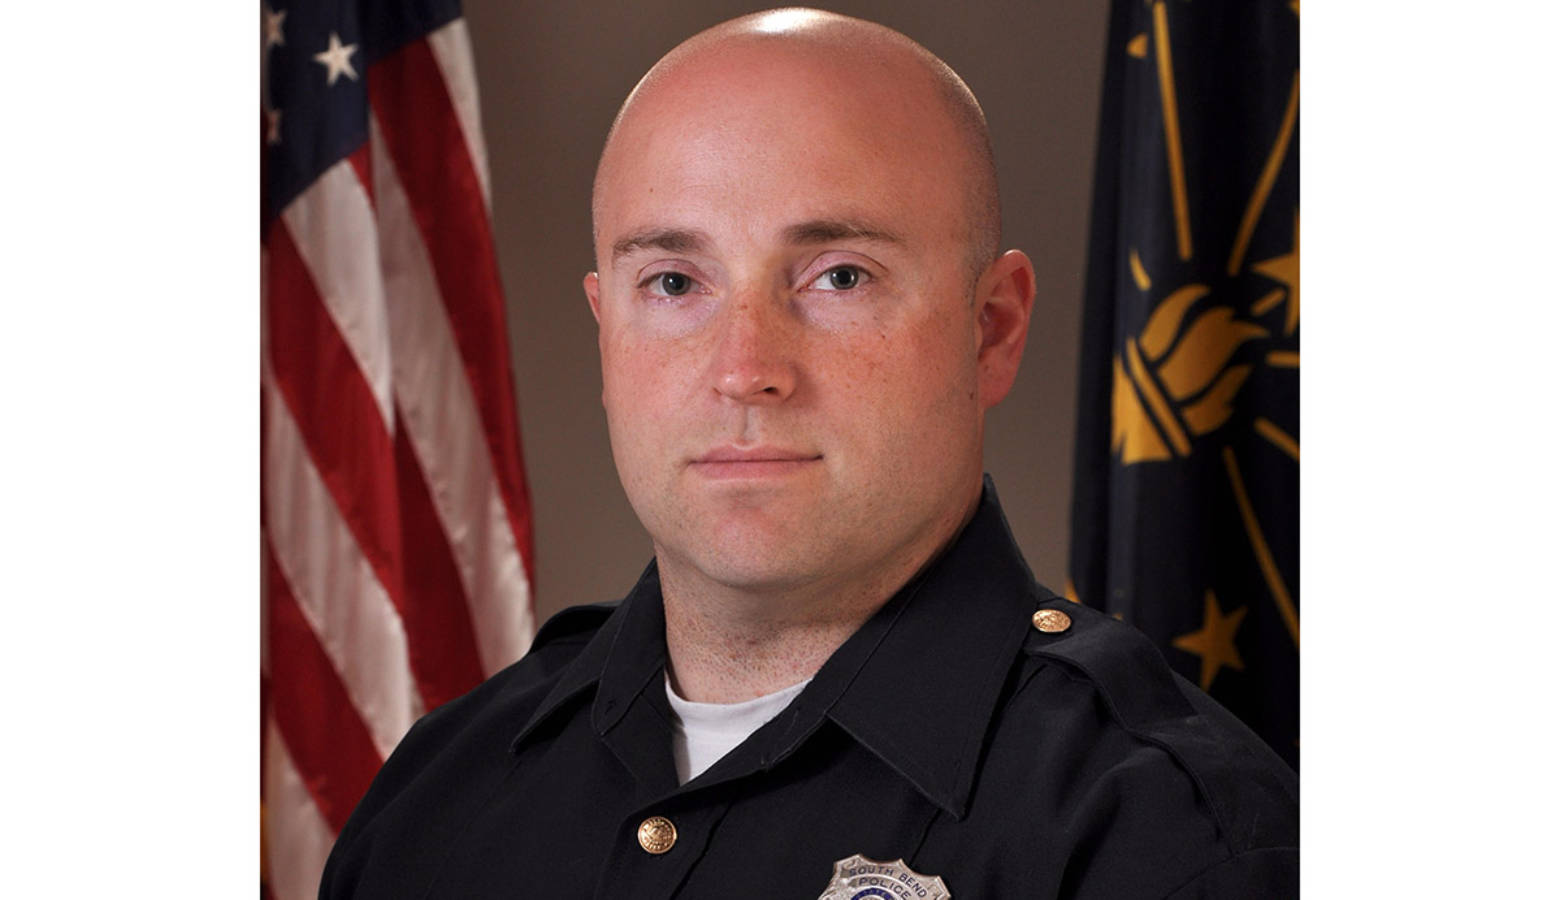 South Bend police officer Sgt. Ryan O'Neill resigned a month after fatally shooting 54-year-old Eric Logan. (Courtesy South Bend Police Department)